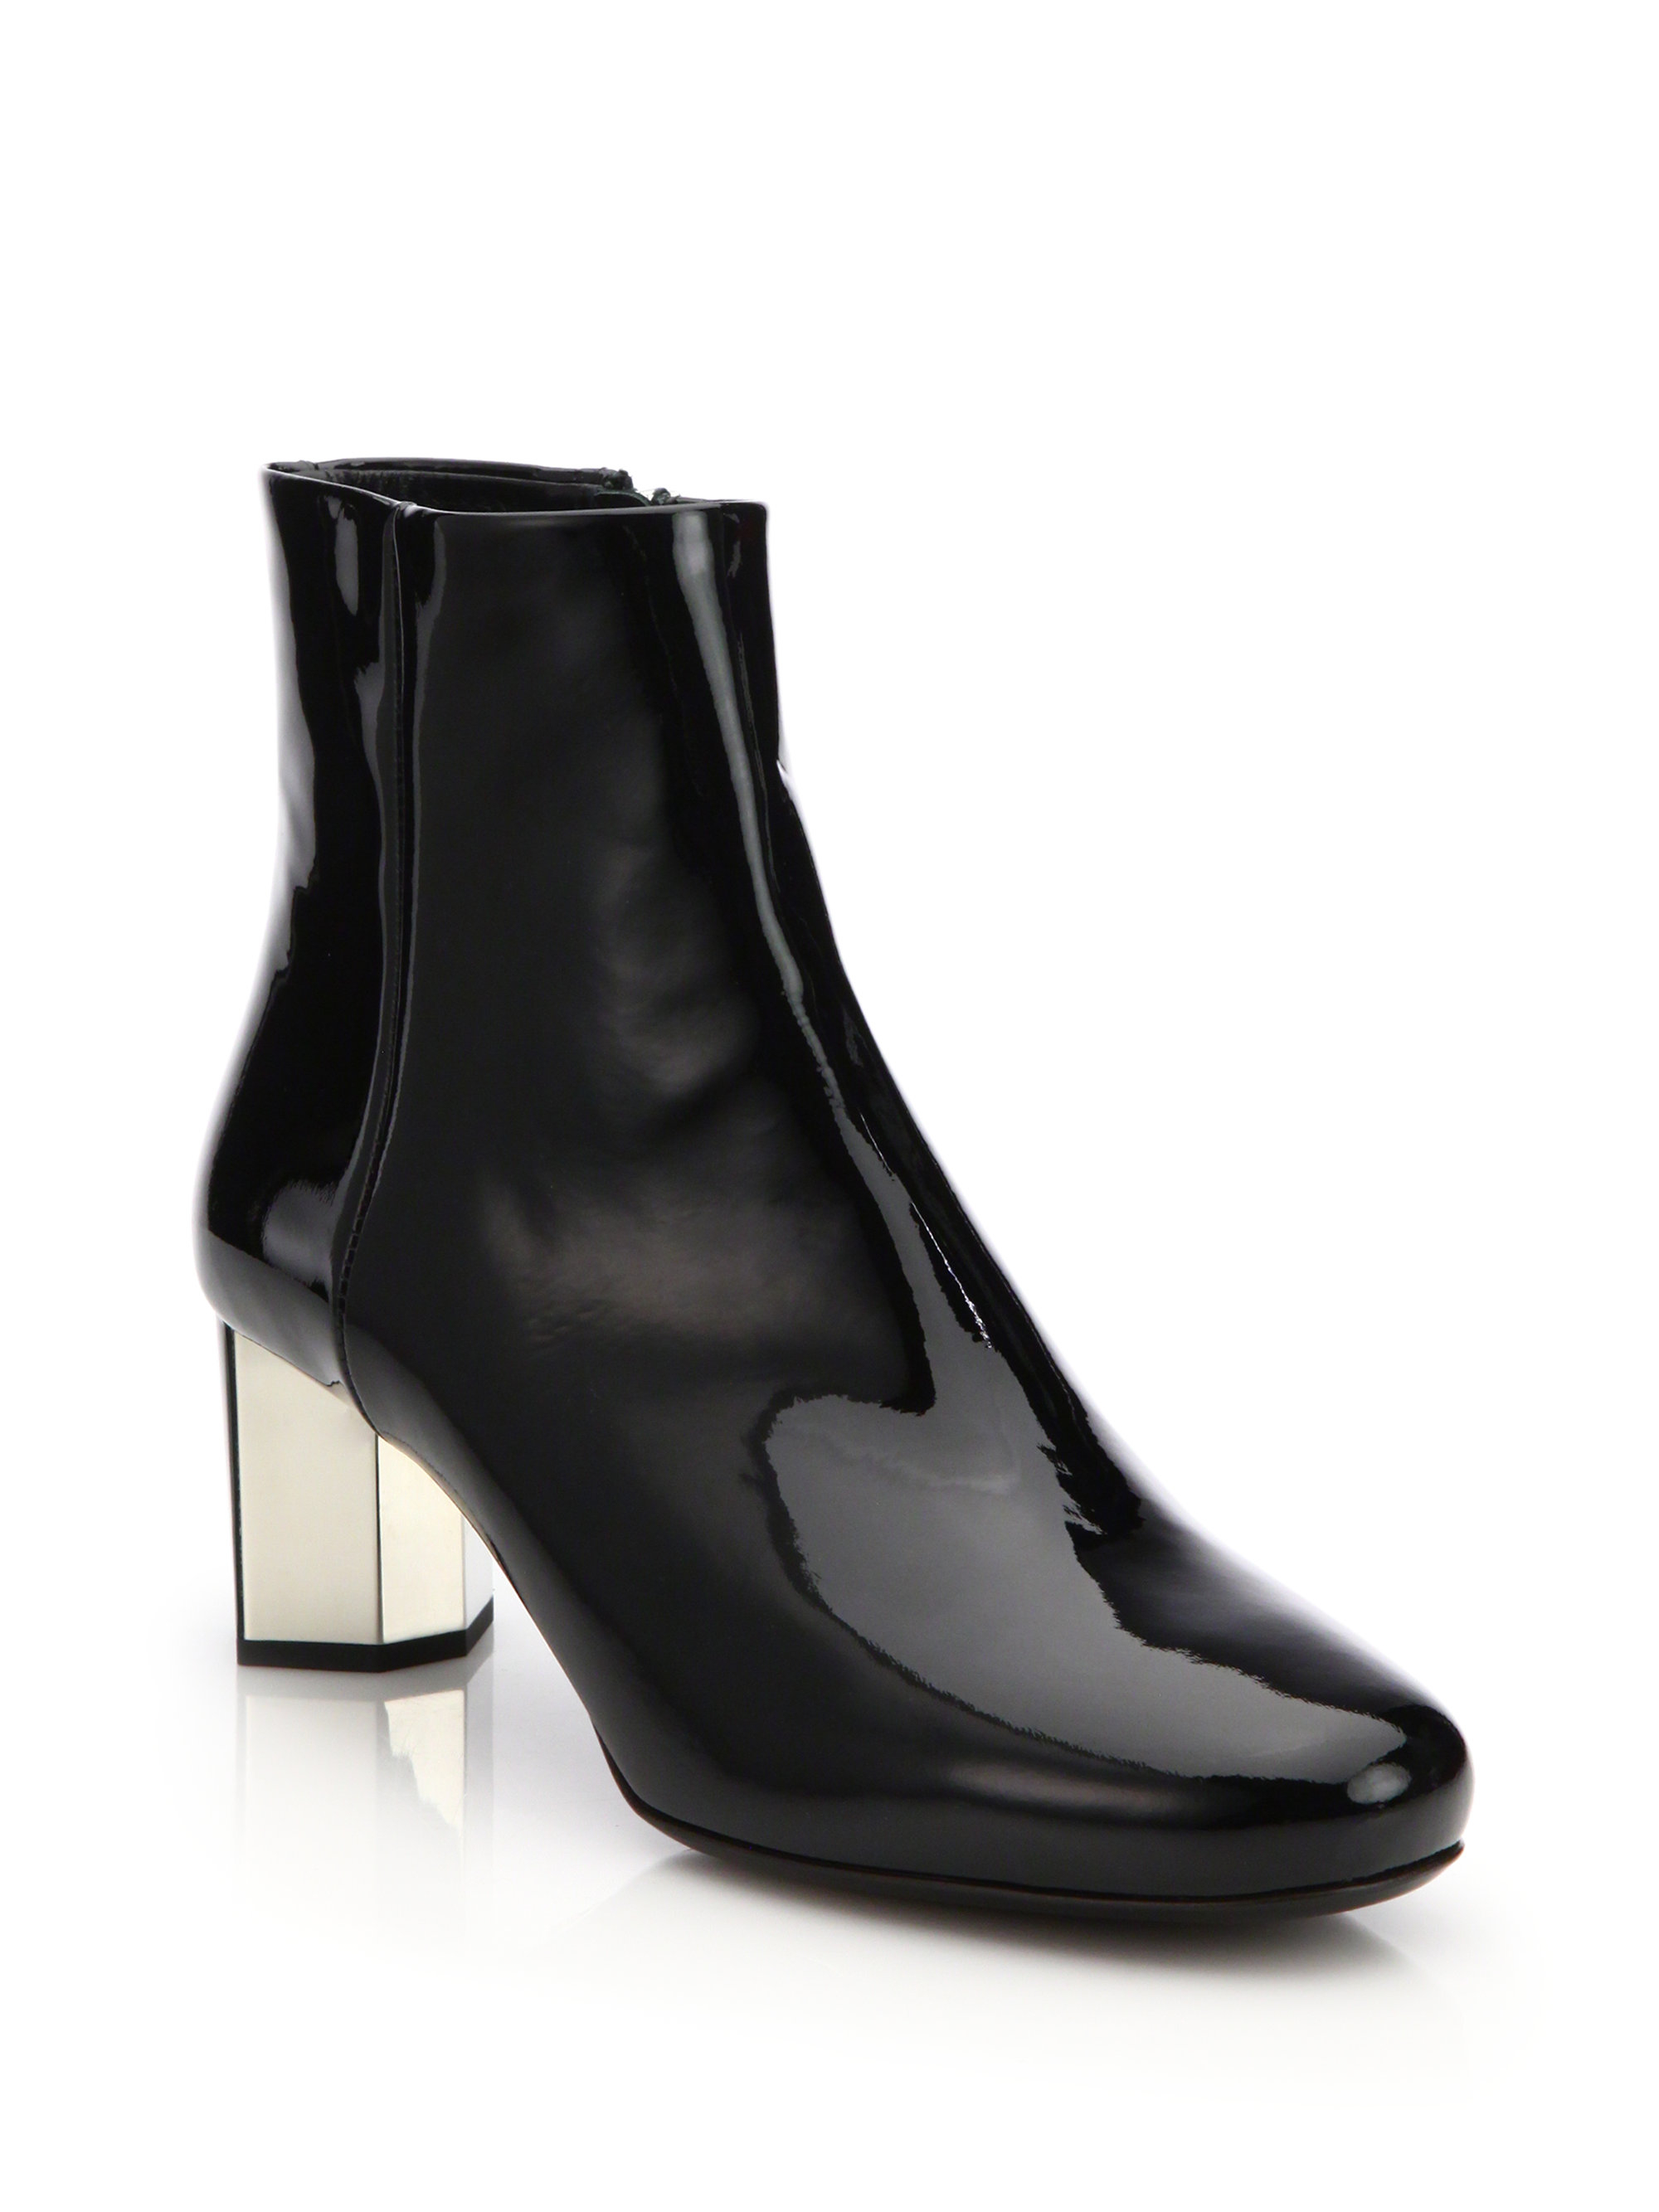 Lyst - Prada Patent Leather Metal-heel Ankle Boots in Black